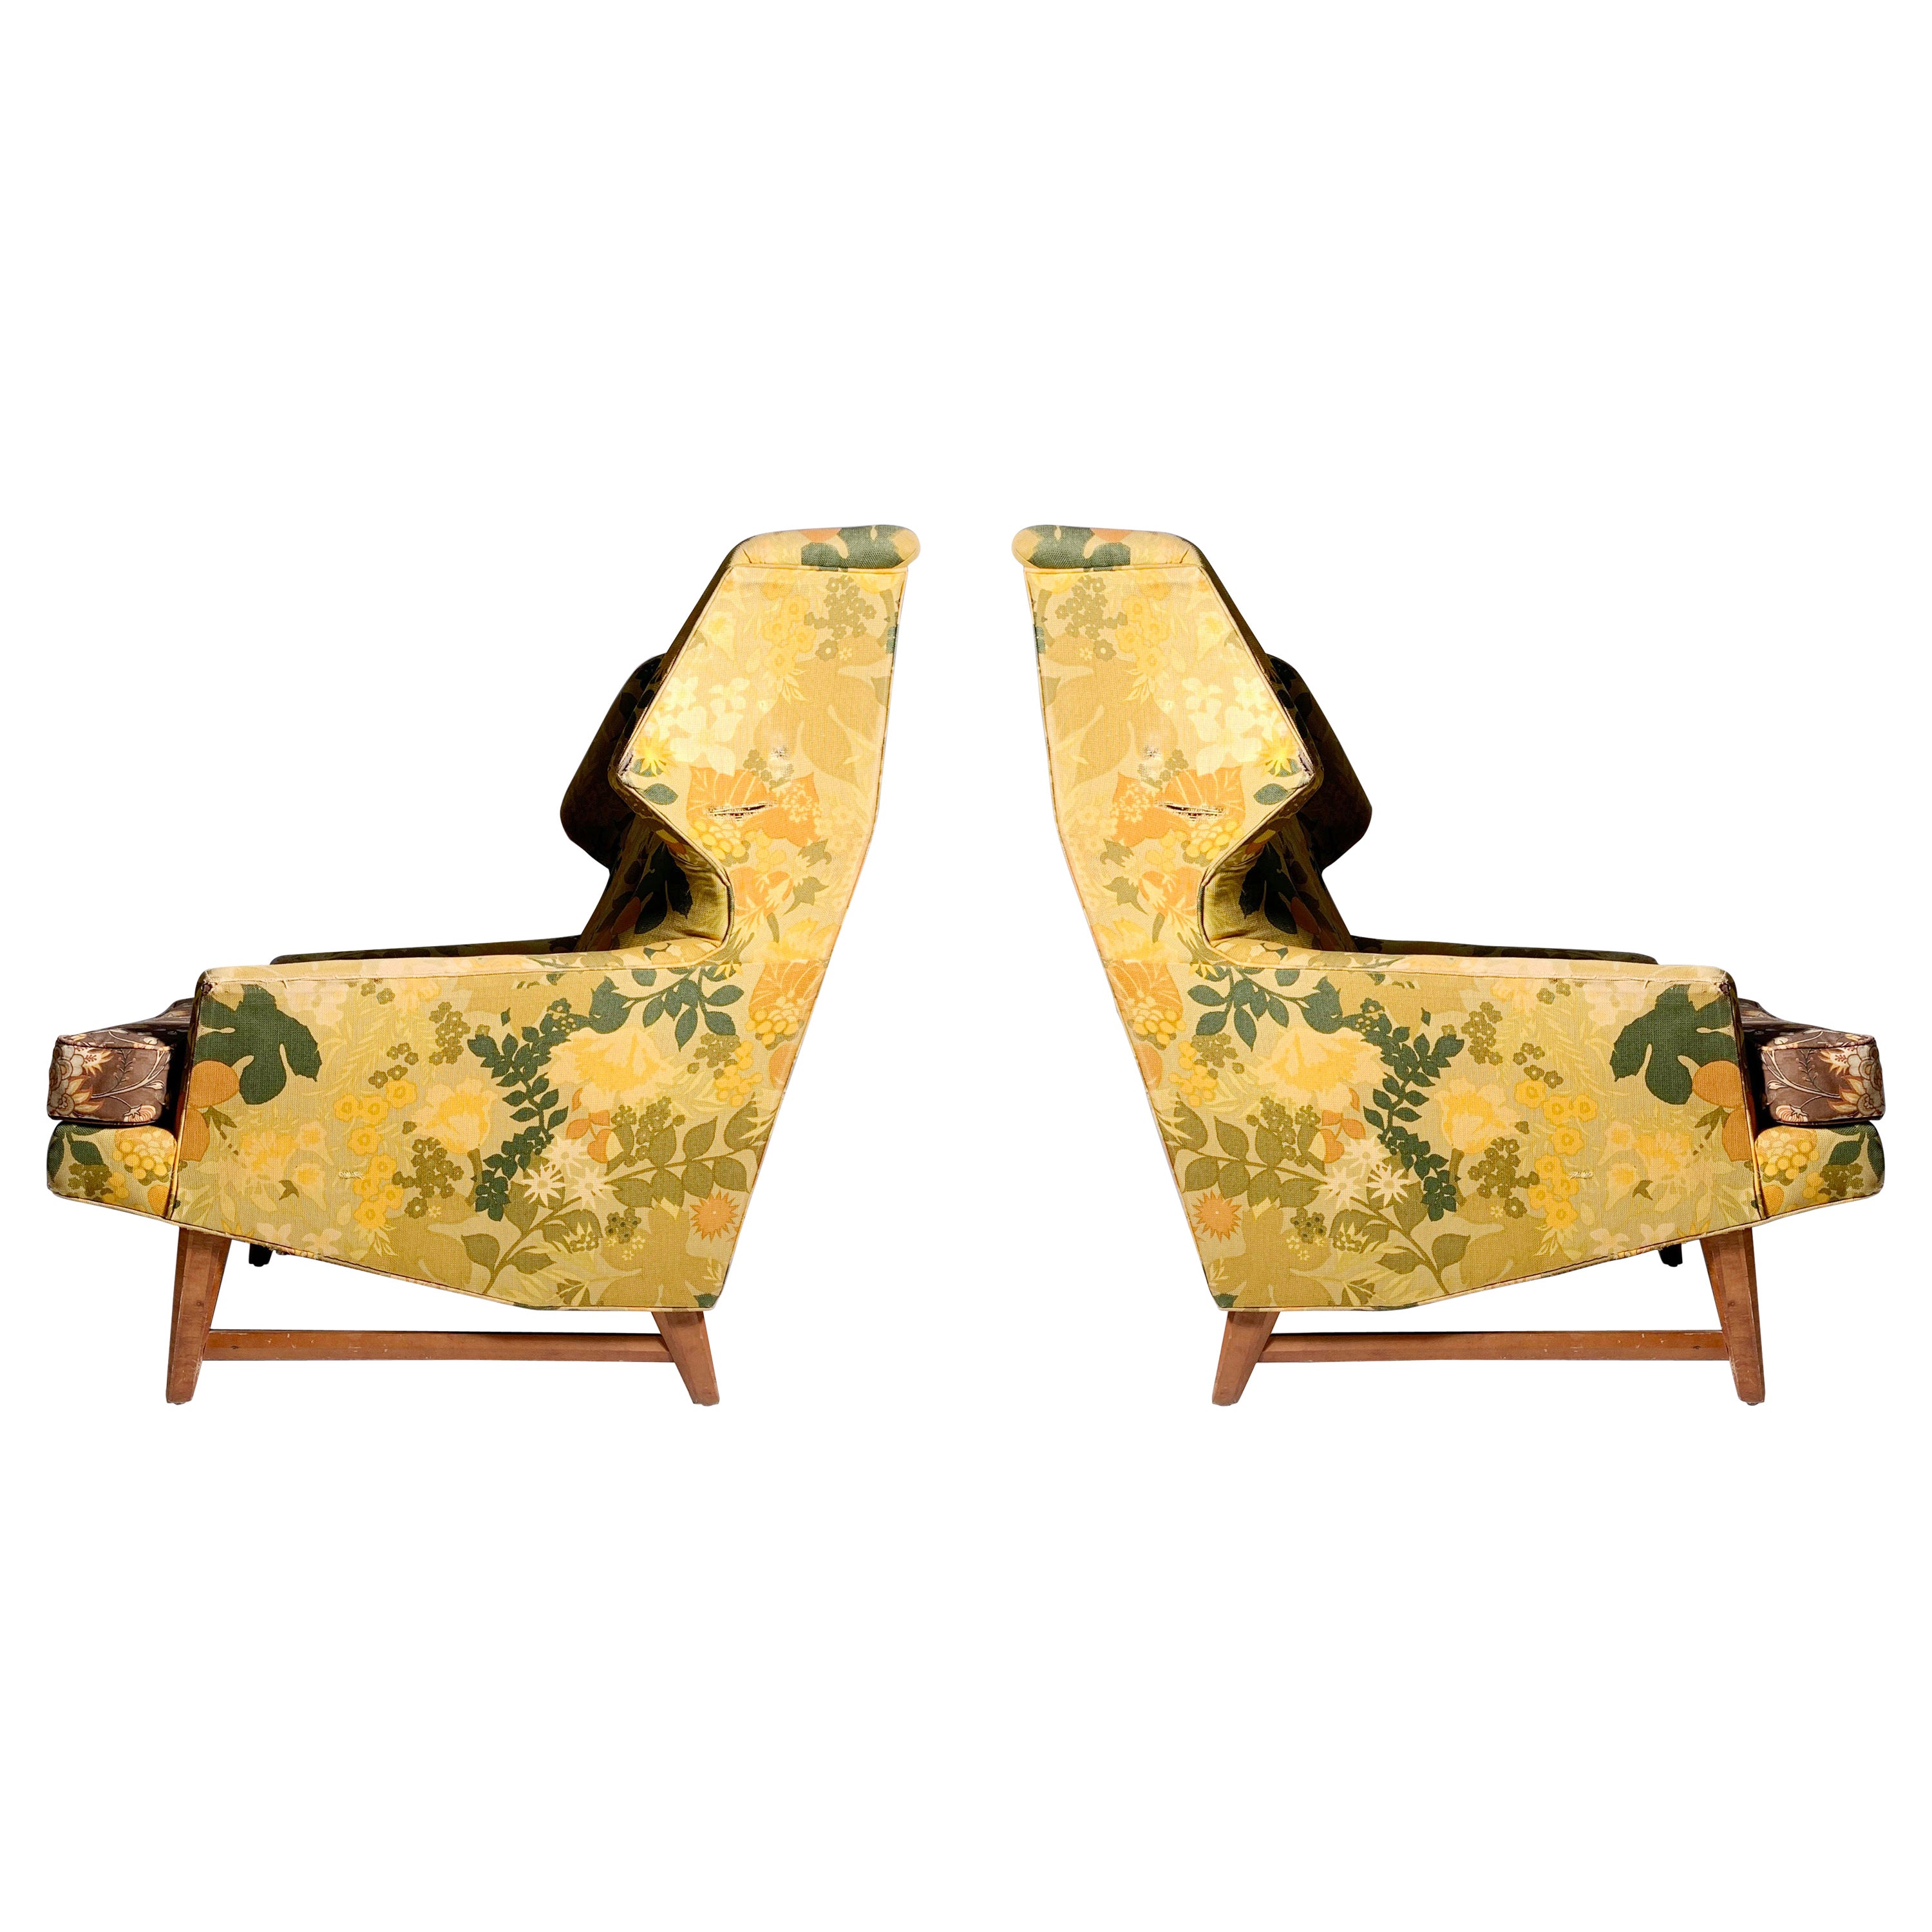 Pair of Vintage Wingback Lounge Chairs attributed to Edward Wormley